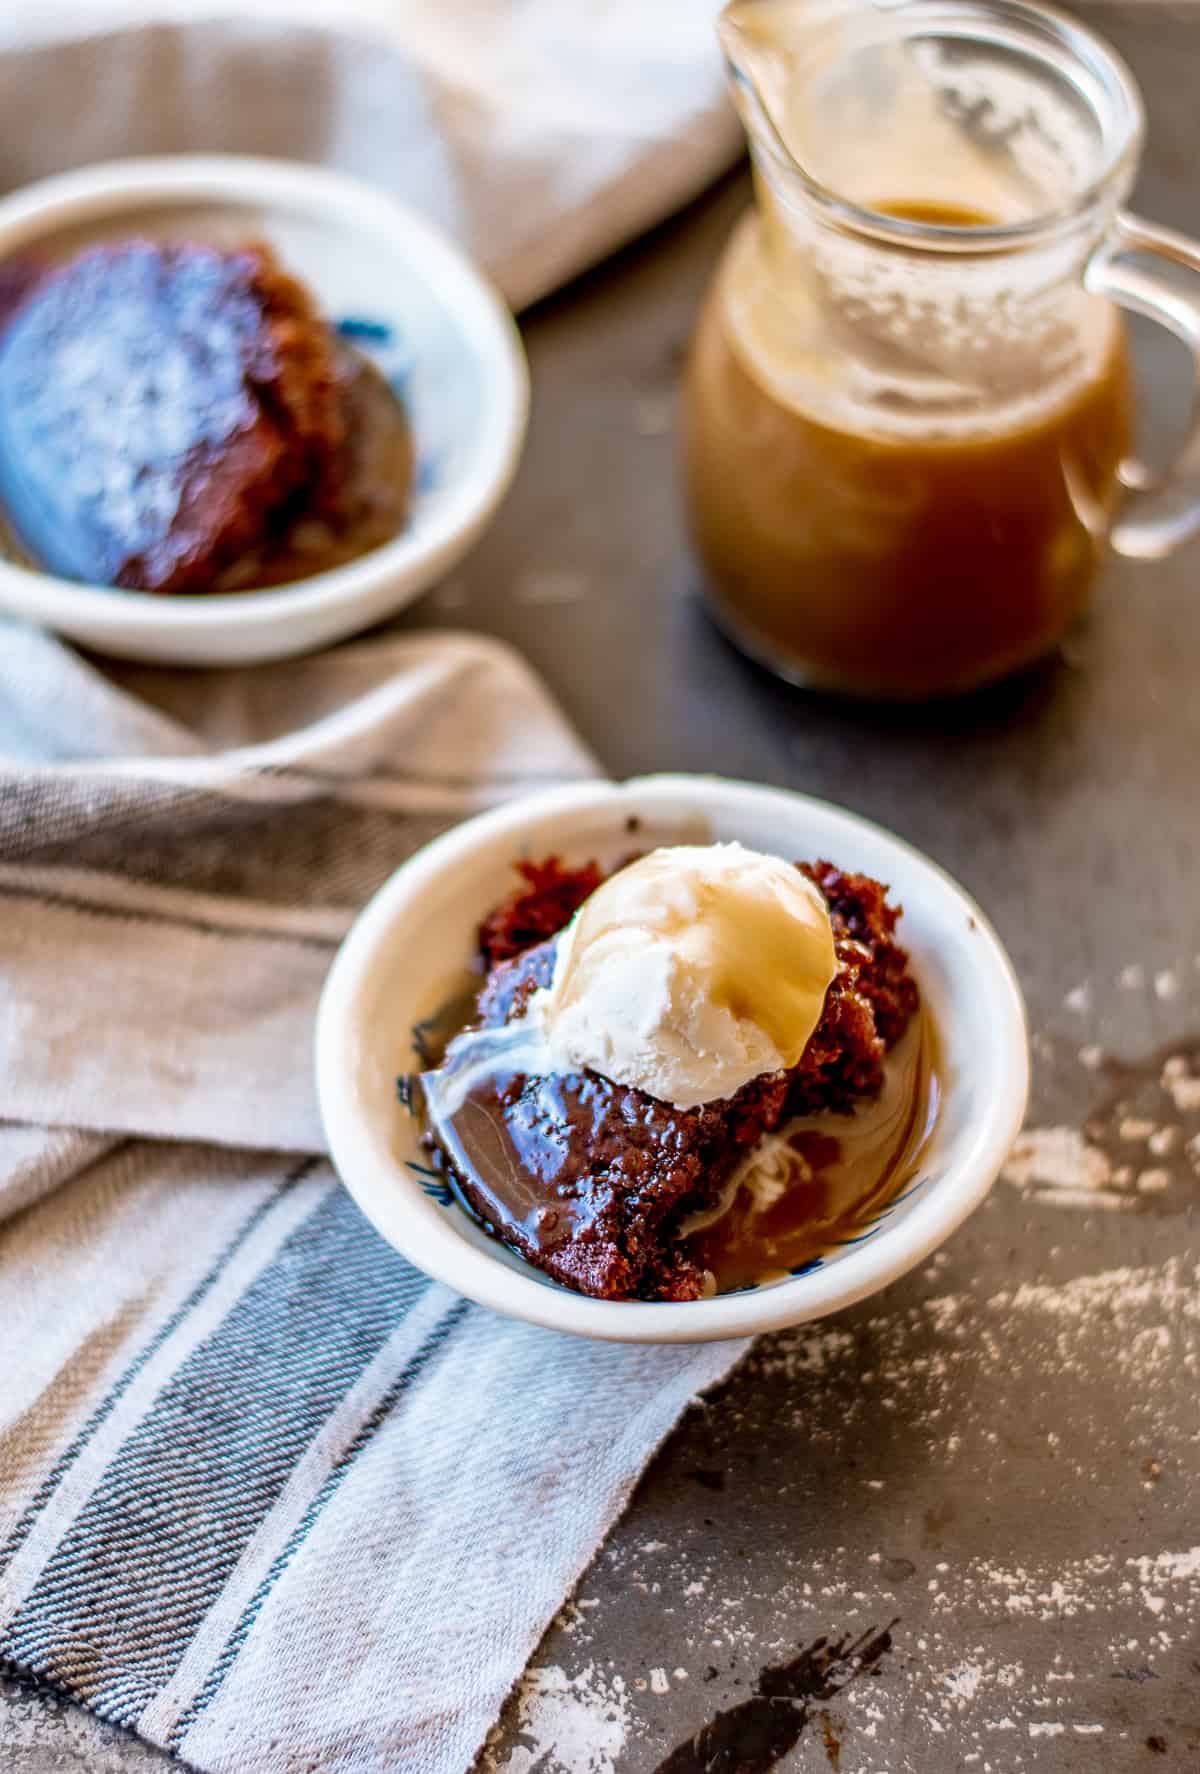 Sticky date pudding with butterscotch sauce and iceream in a bowl.